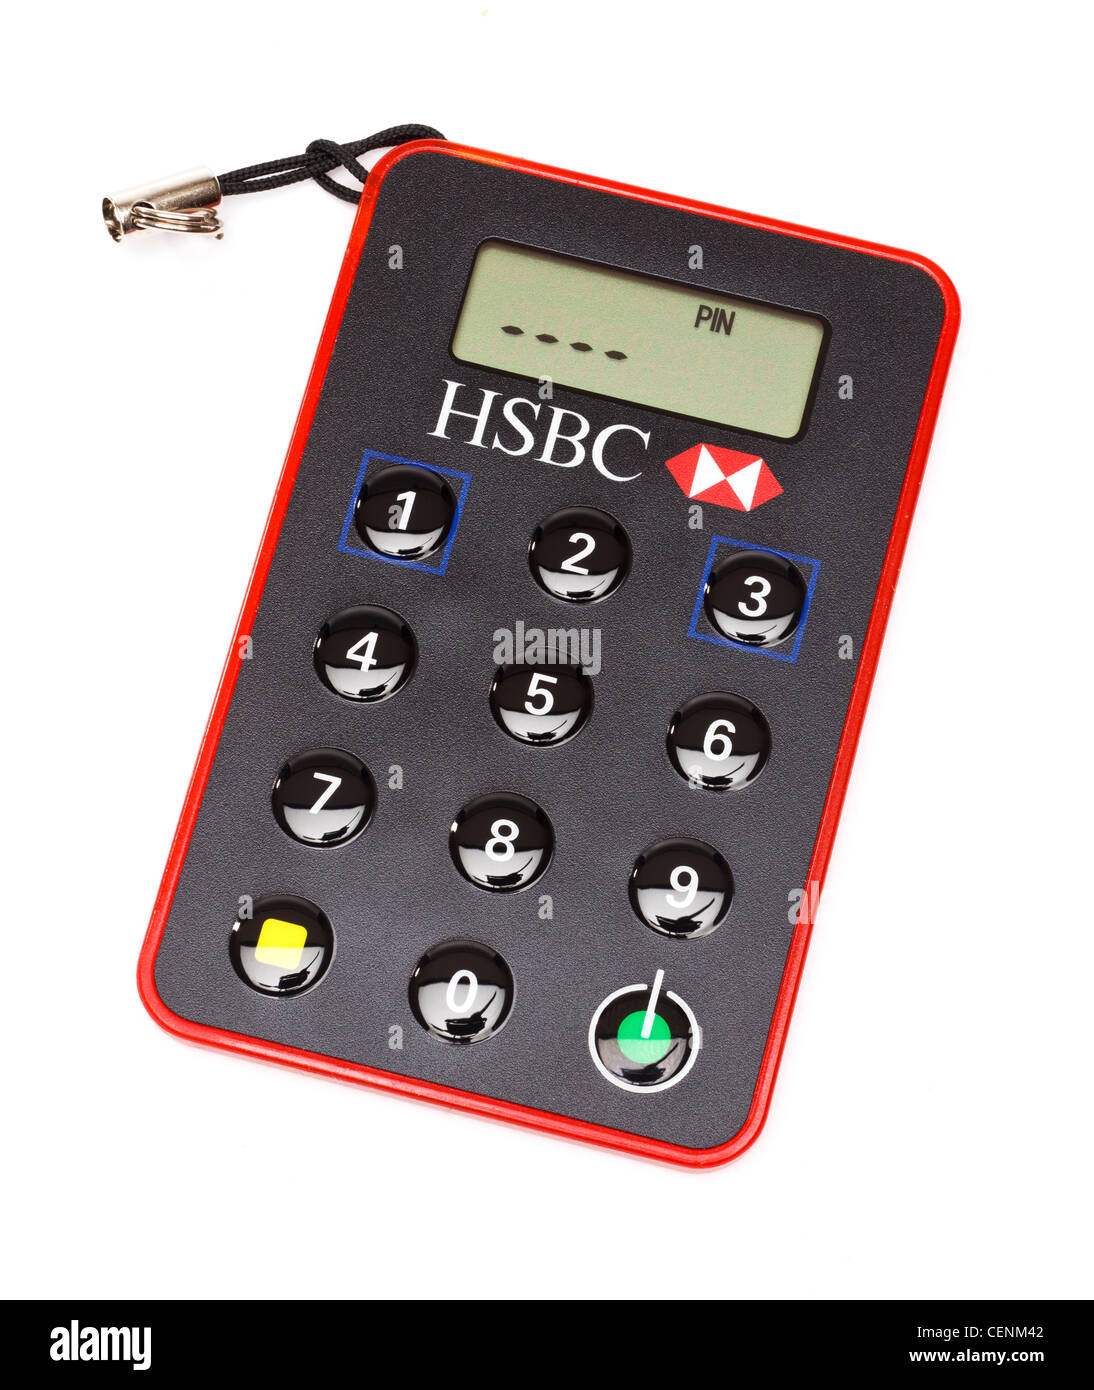 HSBC online banking security device with PIN screen showing Stock ...